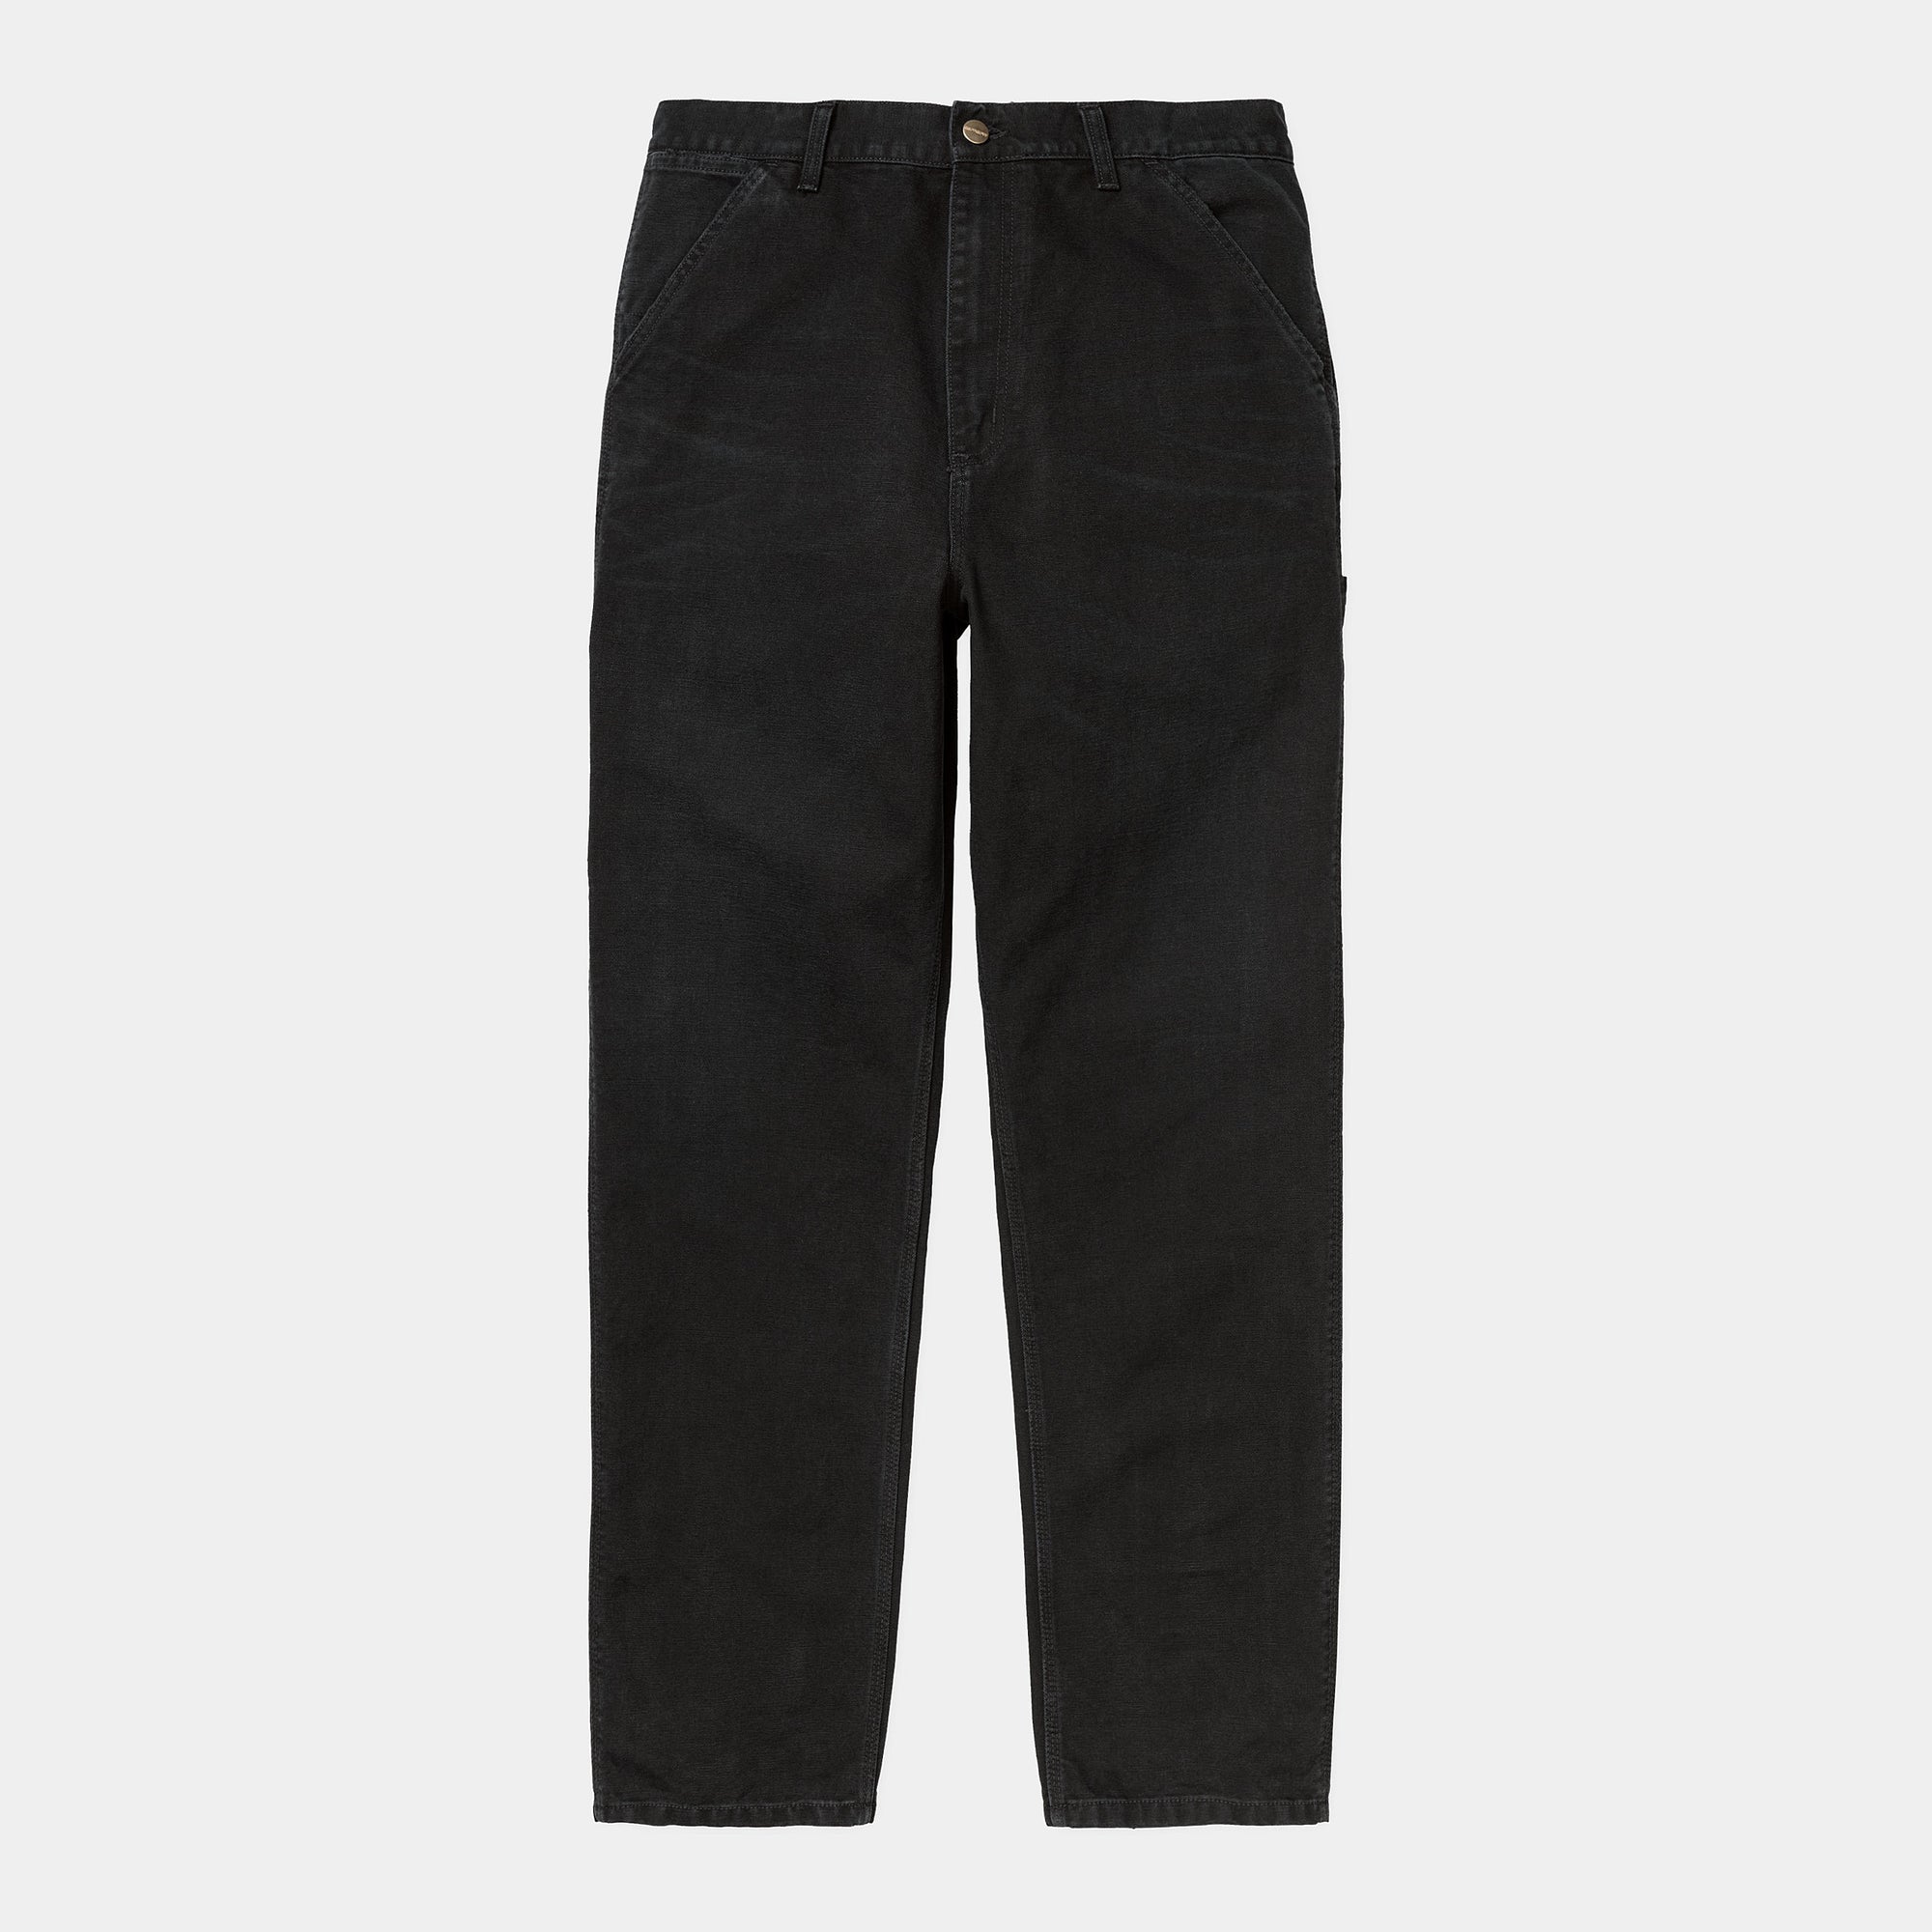 Carhartt WIP - Double Knee Pant - Black Aged Canvas